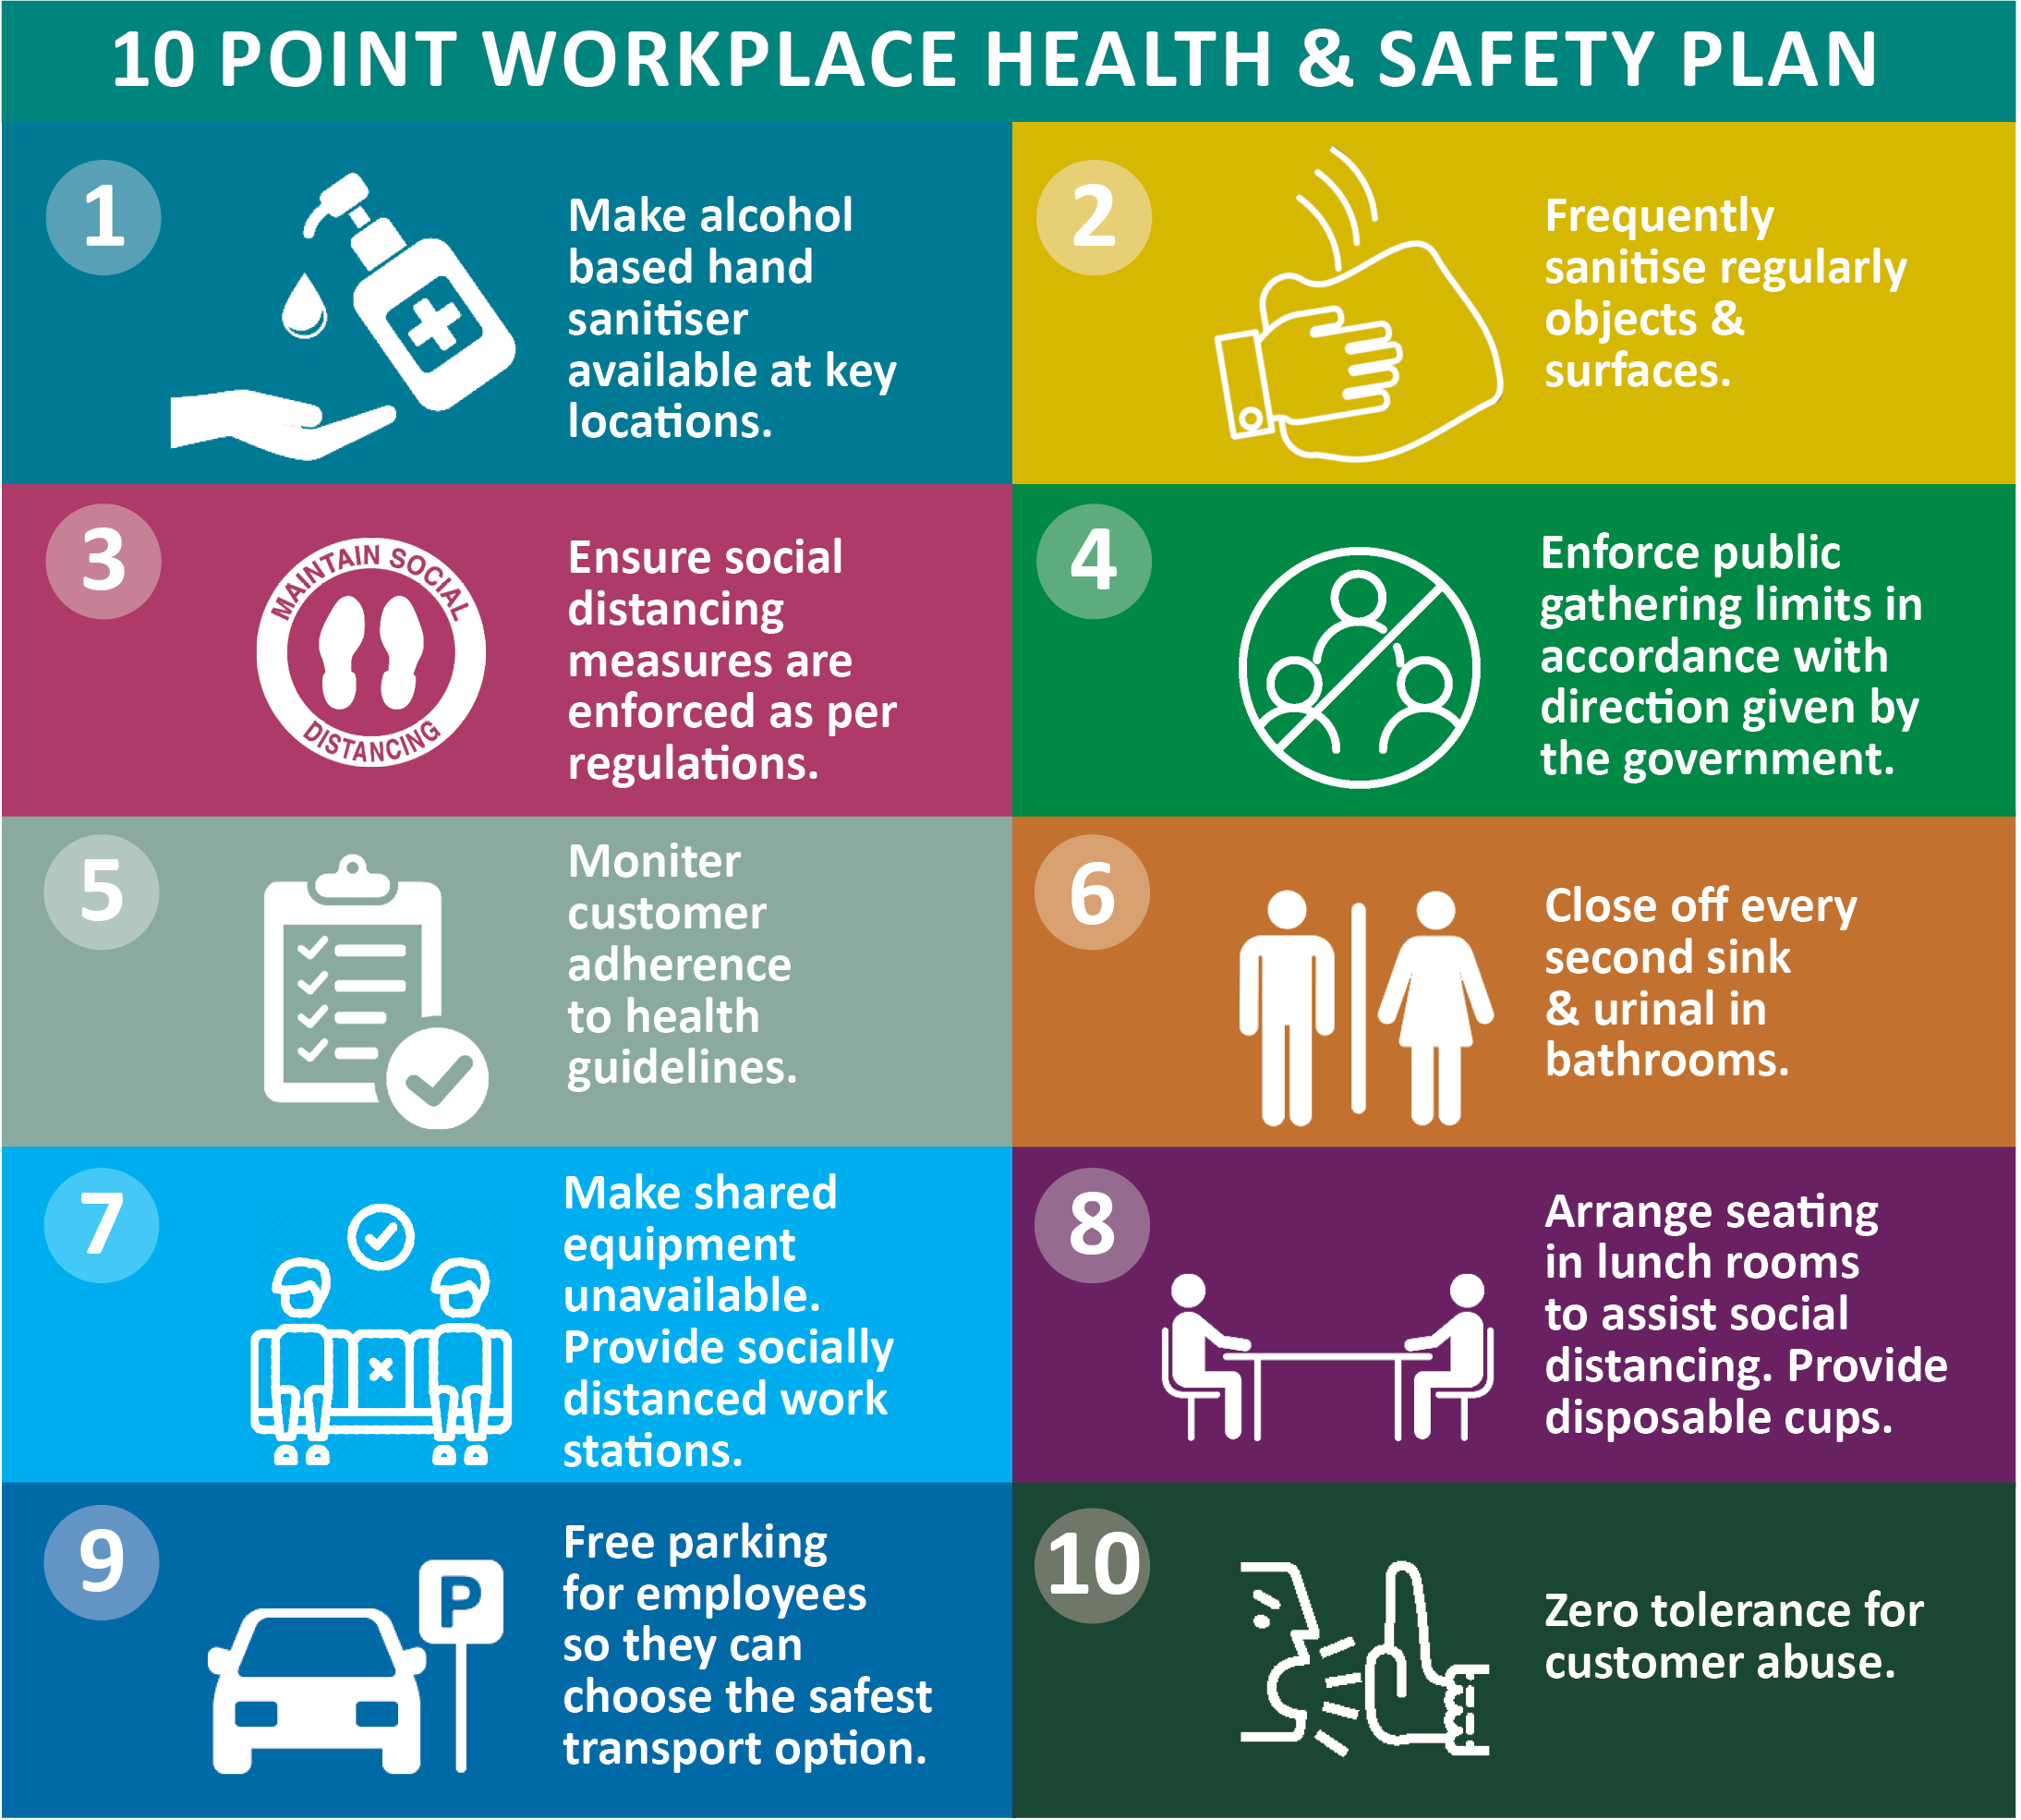 10 point workplace health and safety plan